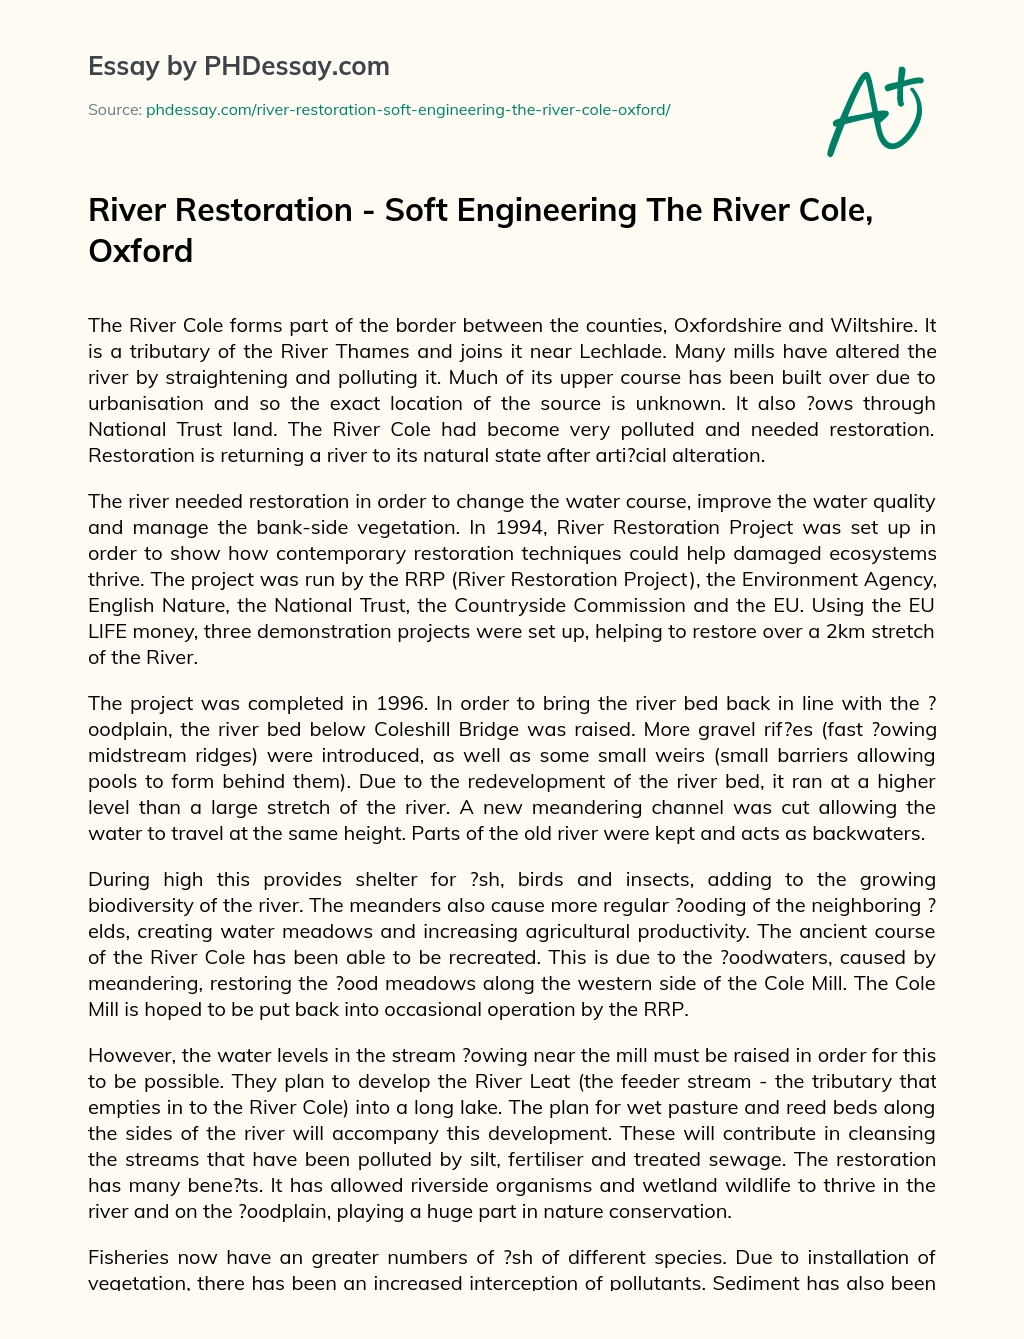 River Restoration – Soft Engineering The River Cole, Oxford essay